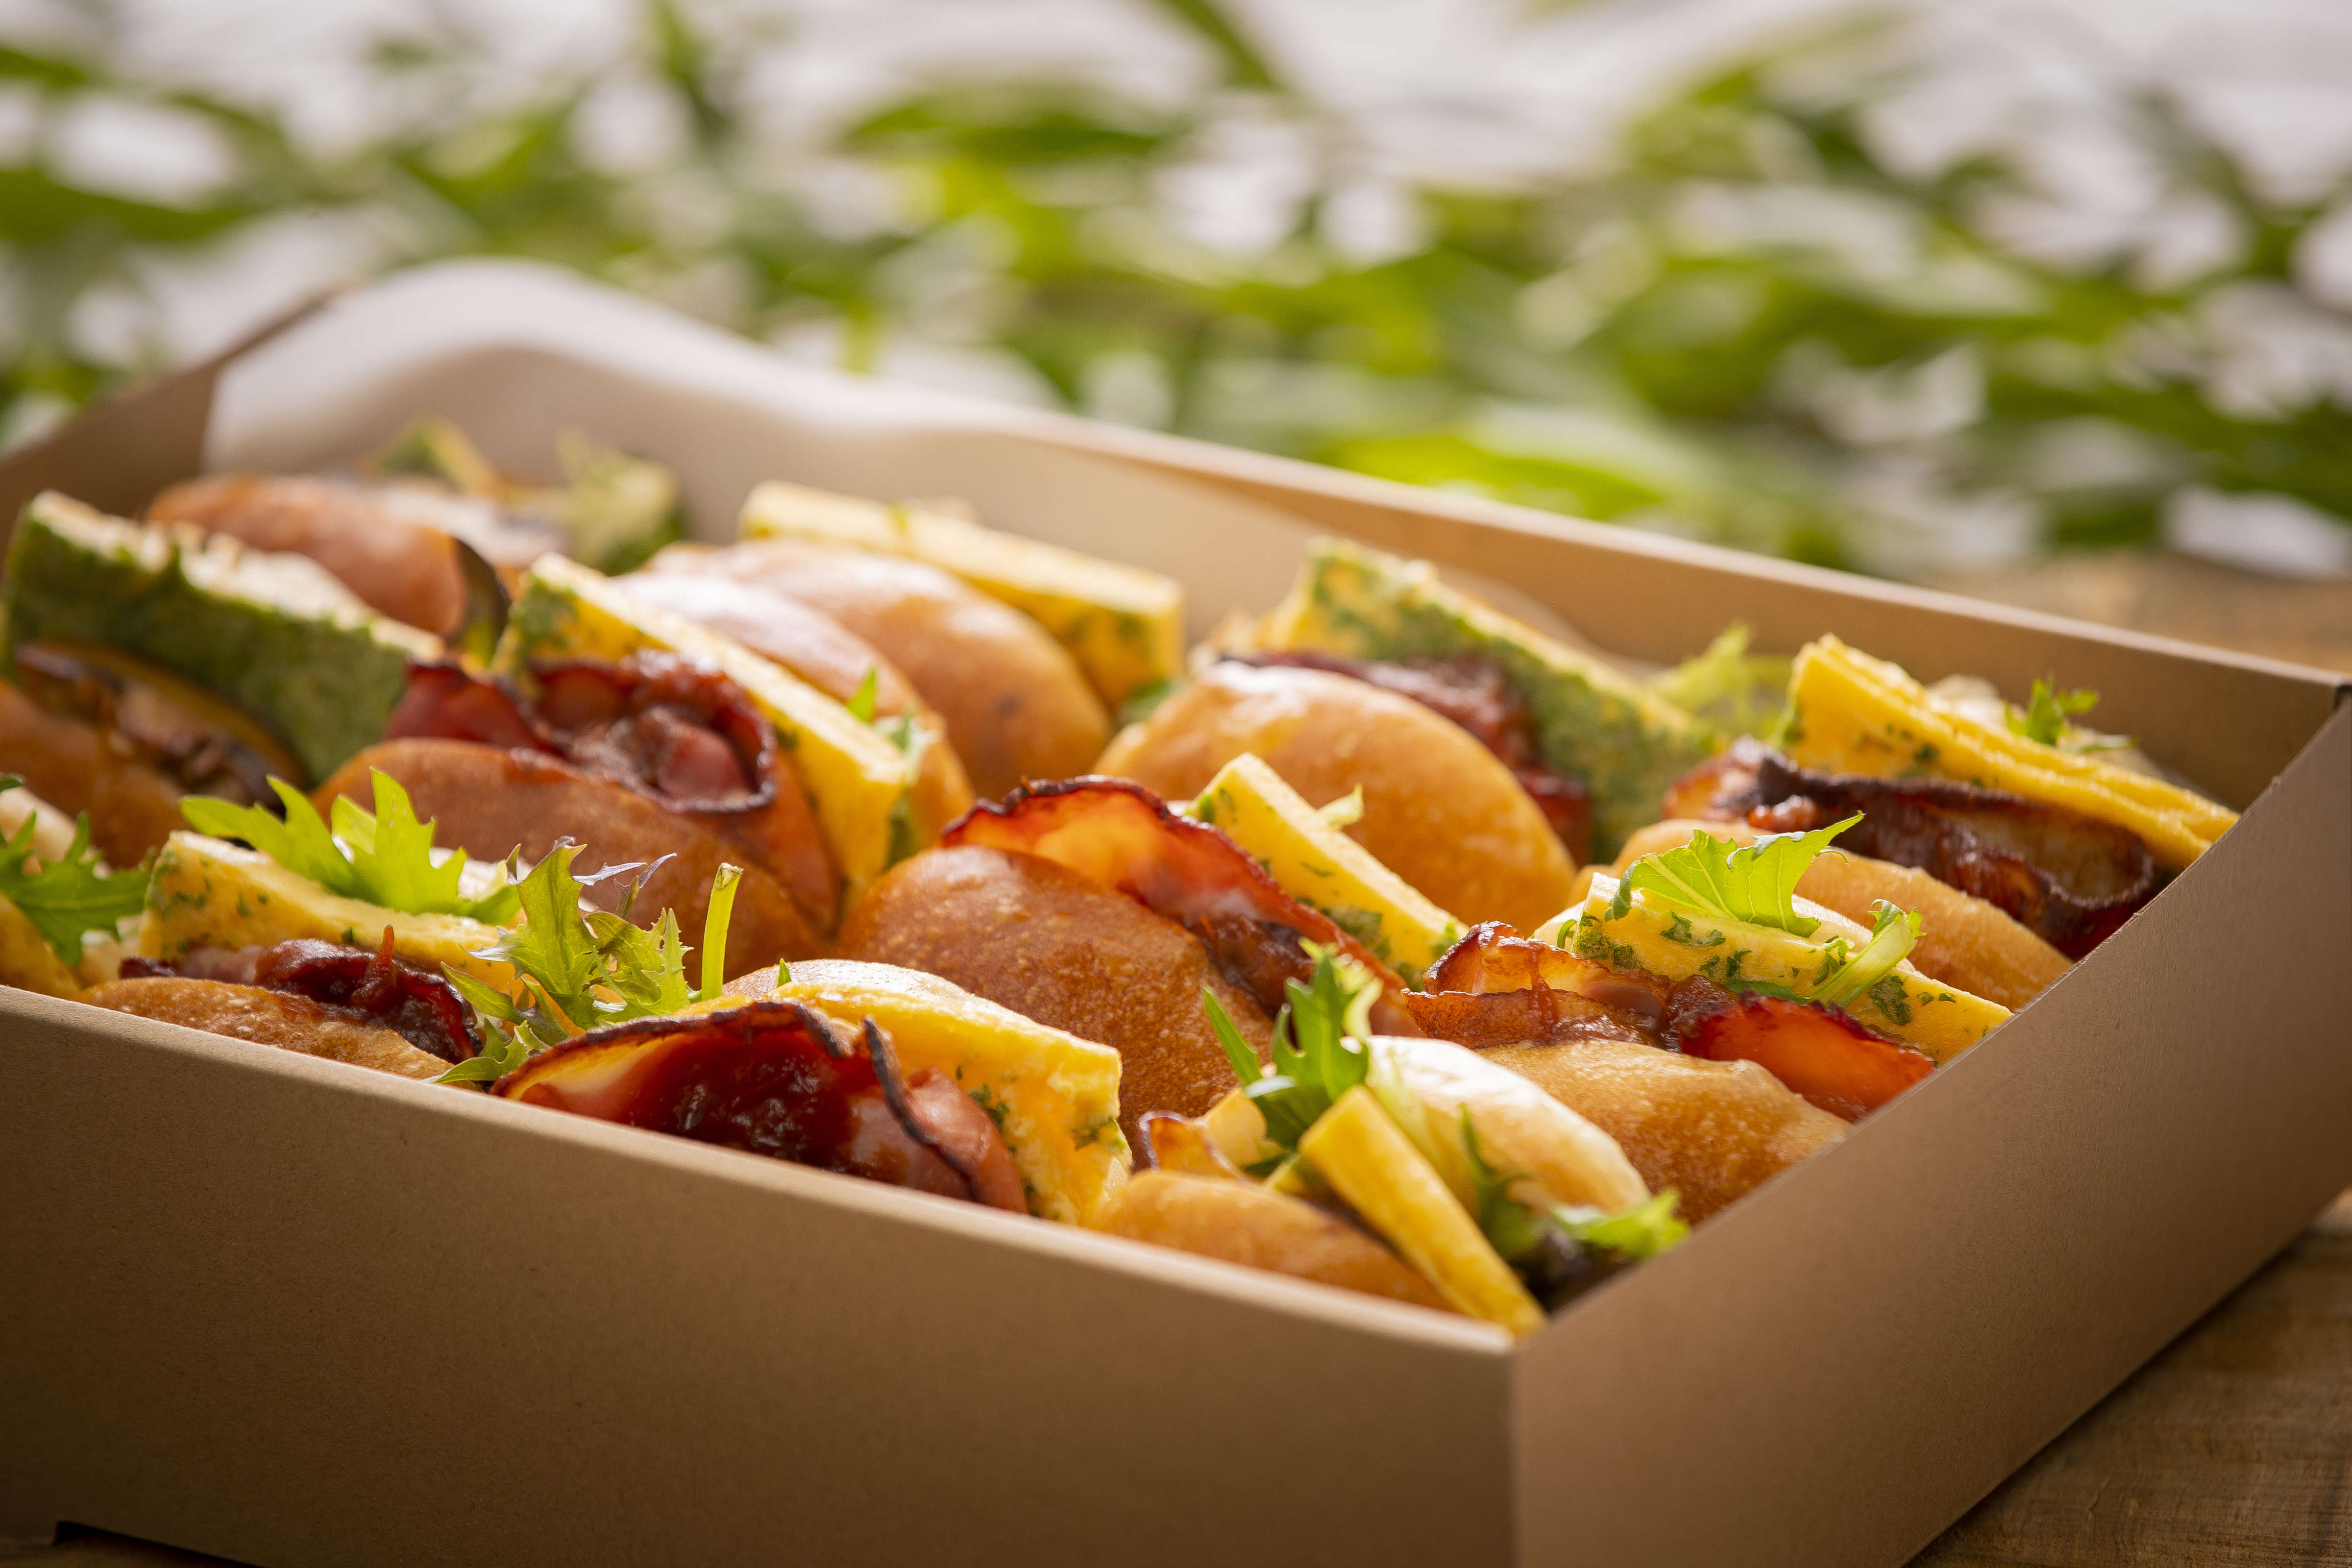 Catering box containing twelve breakfast rolls including some egg and bacon with tomato relish rolls, and some egg and mushroom with tomato relish rolls. Photo: Richard Jupe.